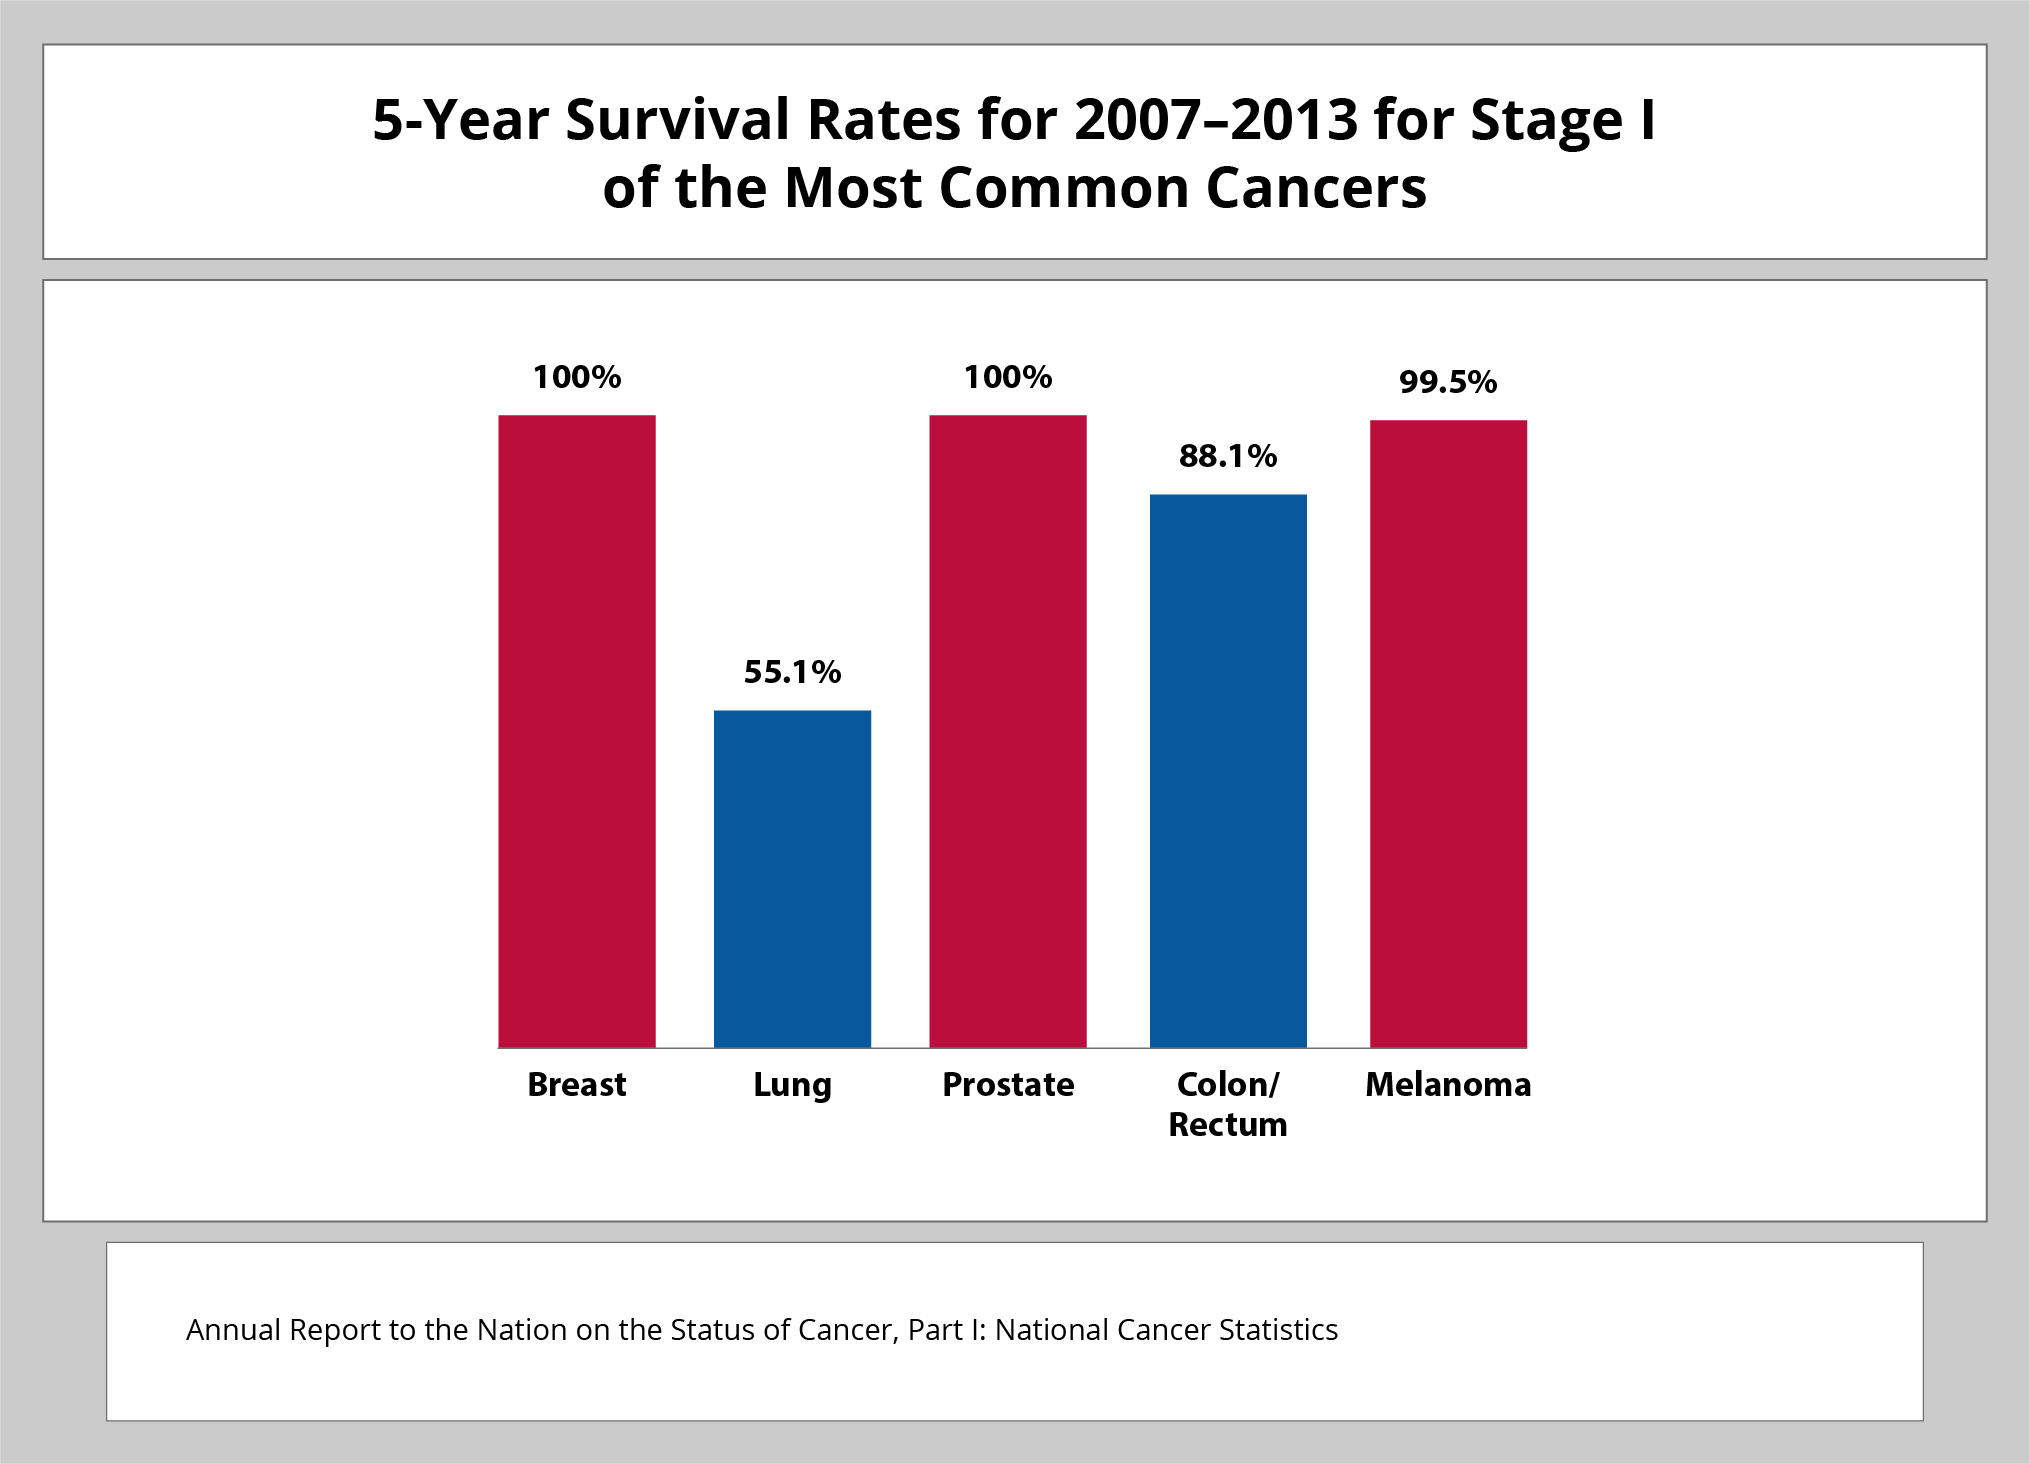 5-Year Survivial Rates for 2007-2013 for Stage 1 of the Most Common Cancers